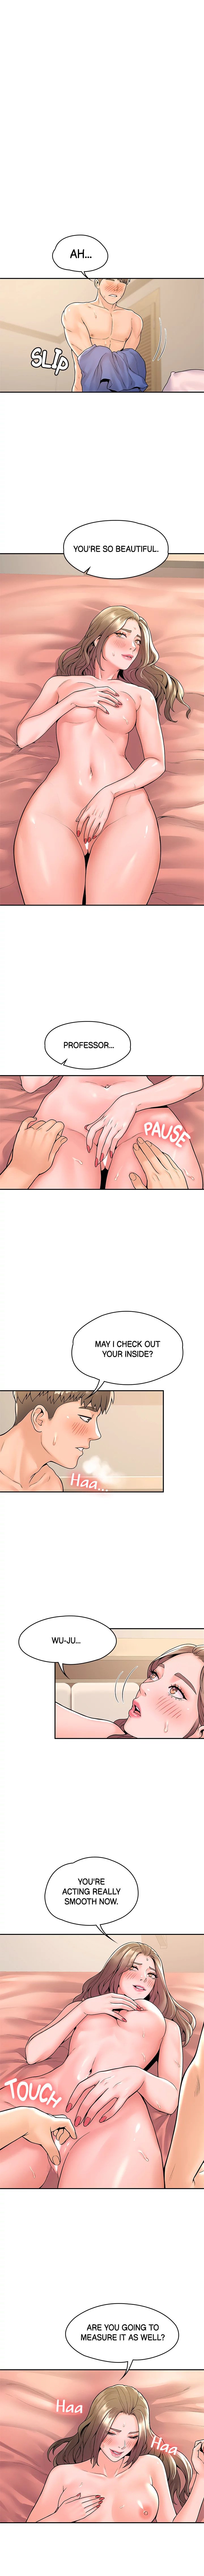 campus-today-chap-46-8